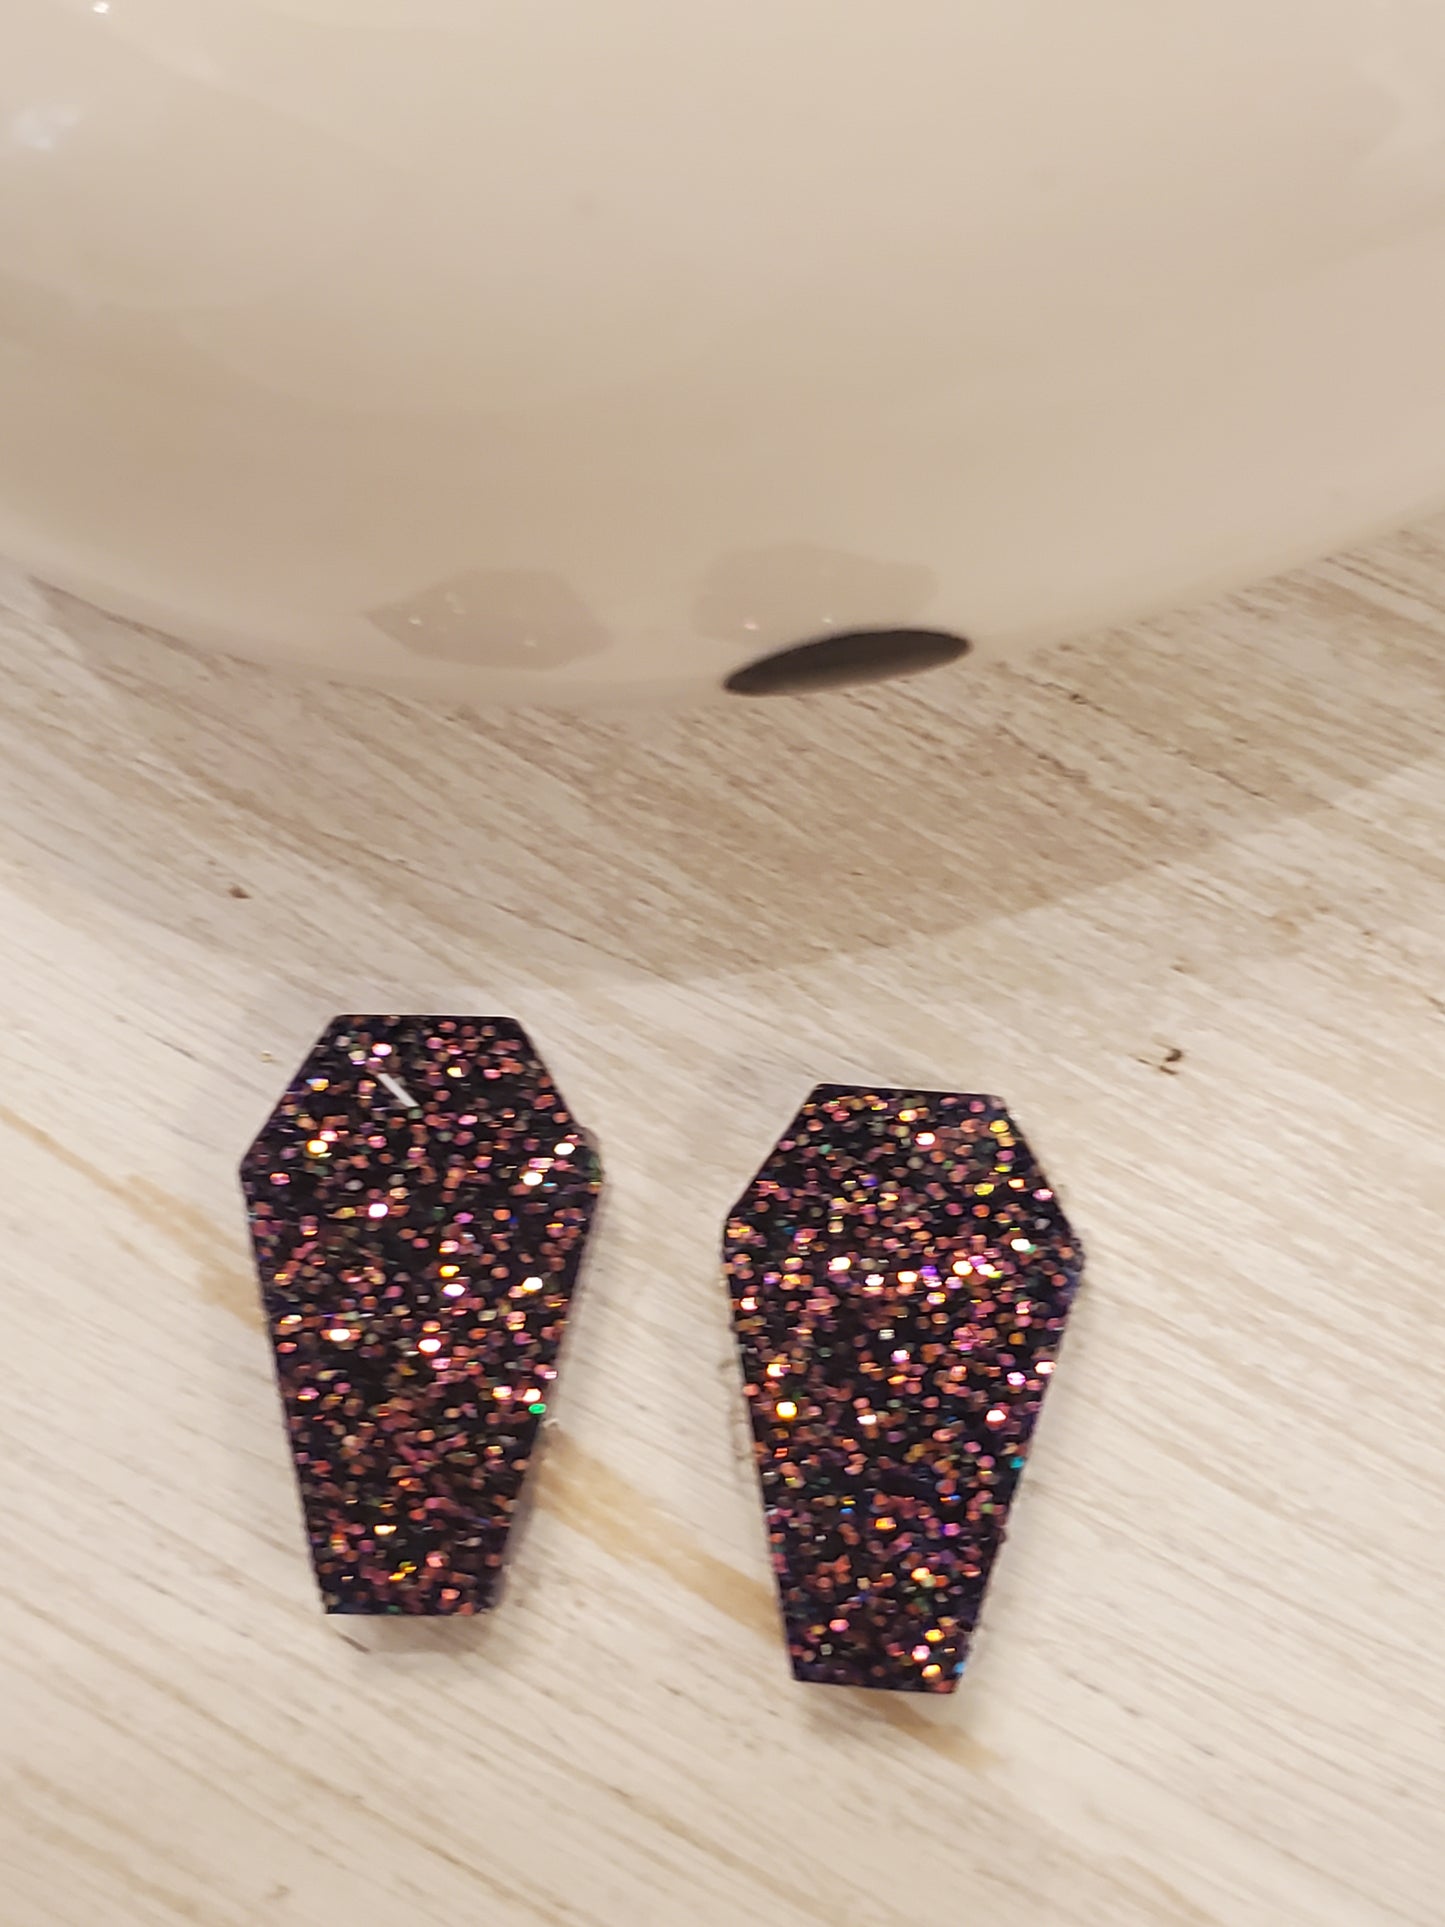 Handmade resin and glitter Coffin mixed earrings small studs